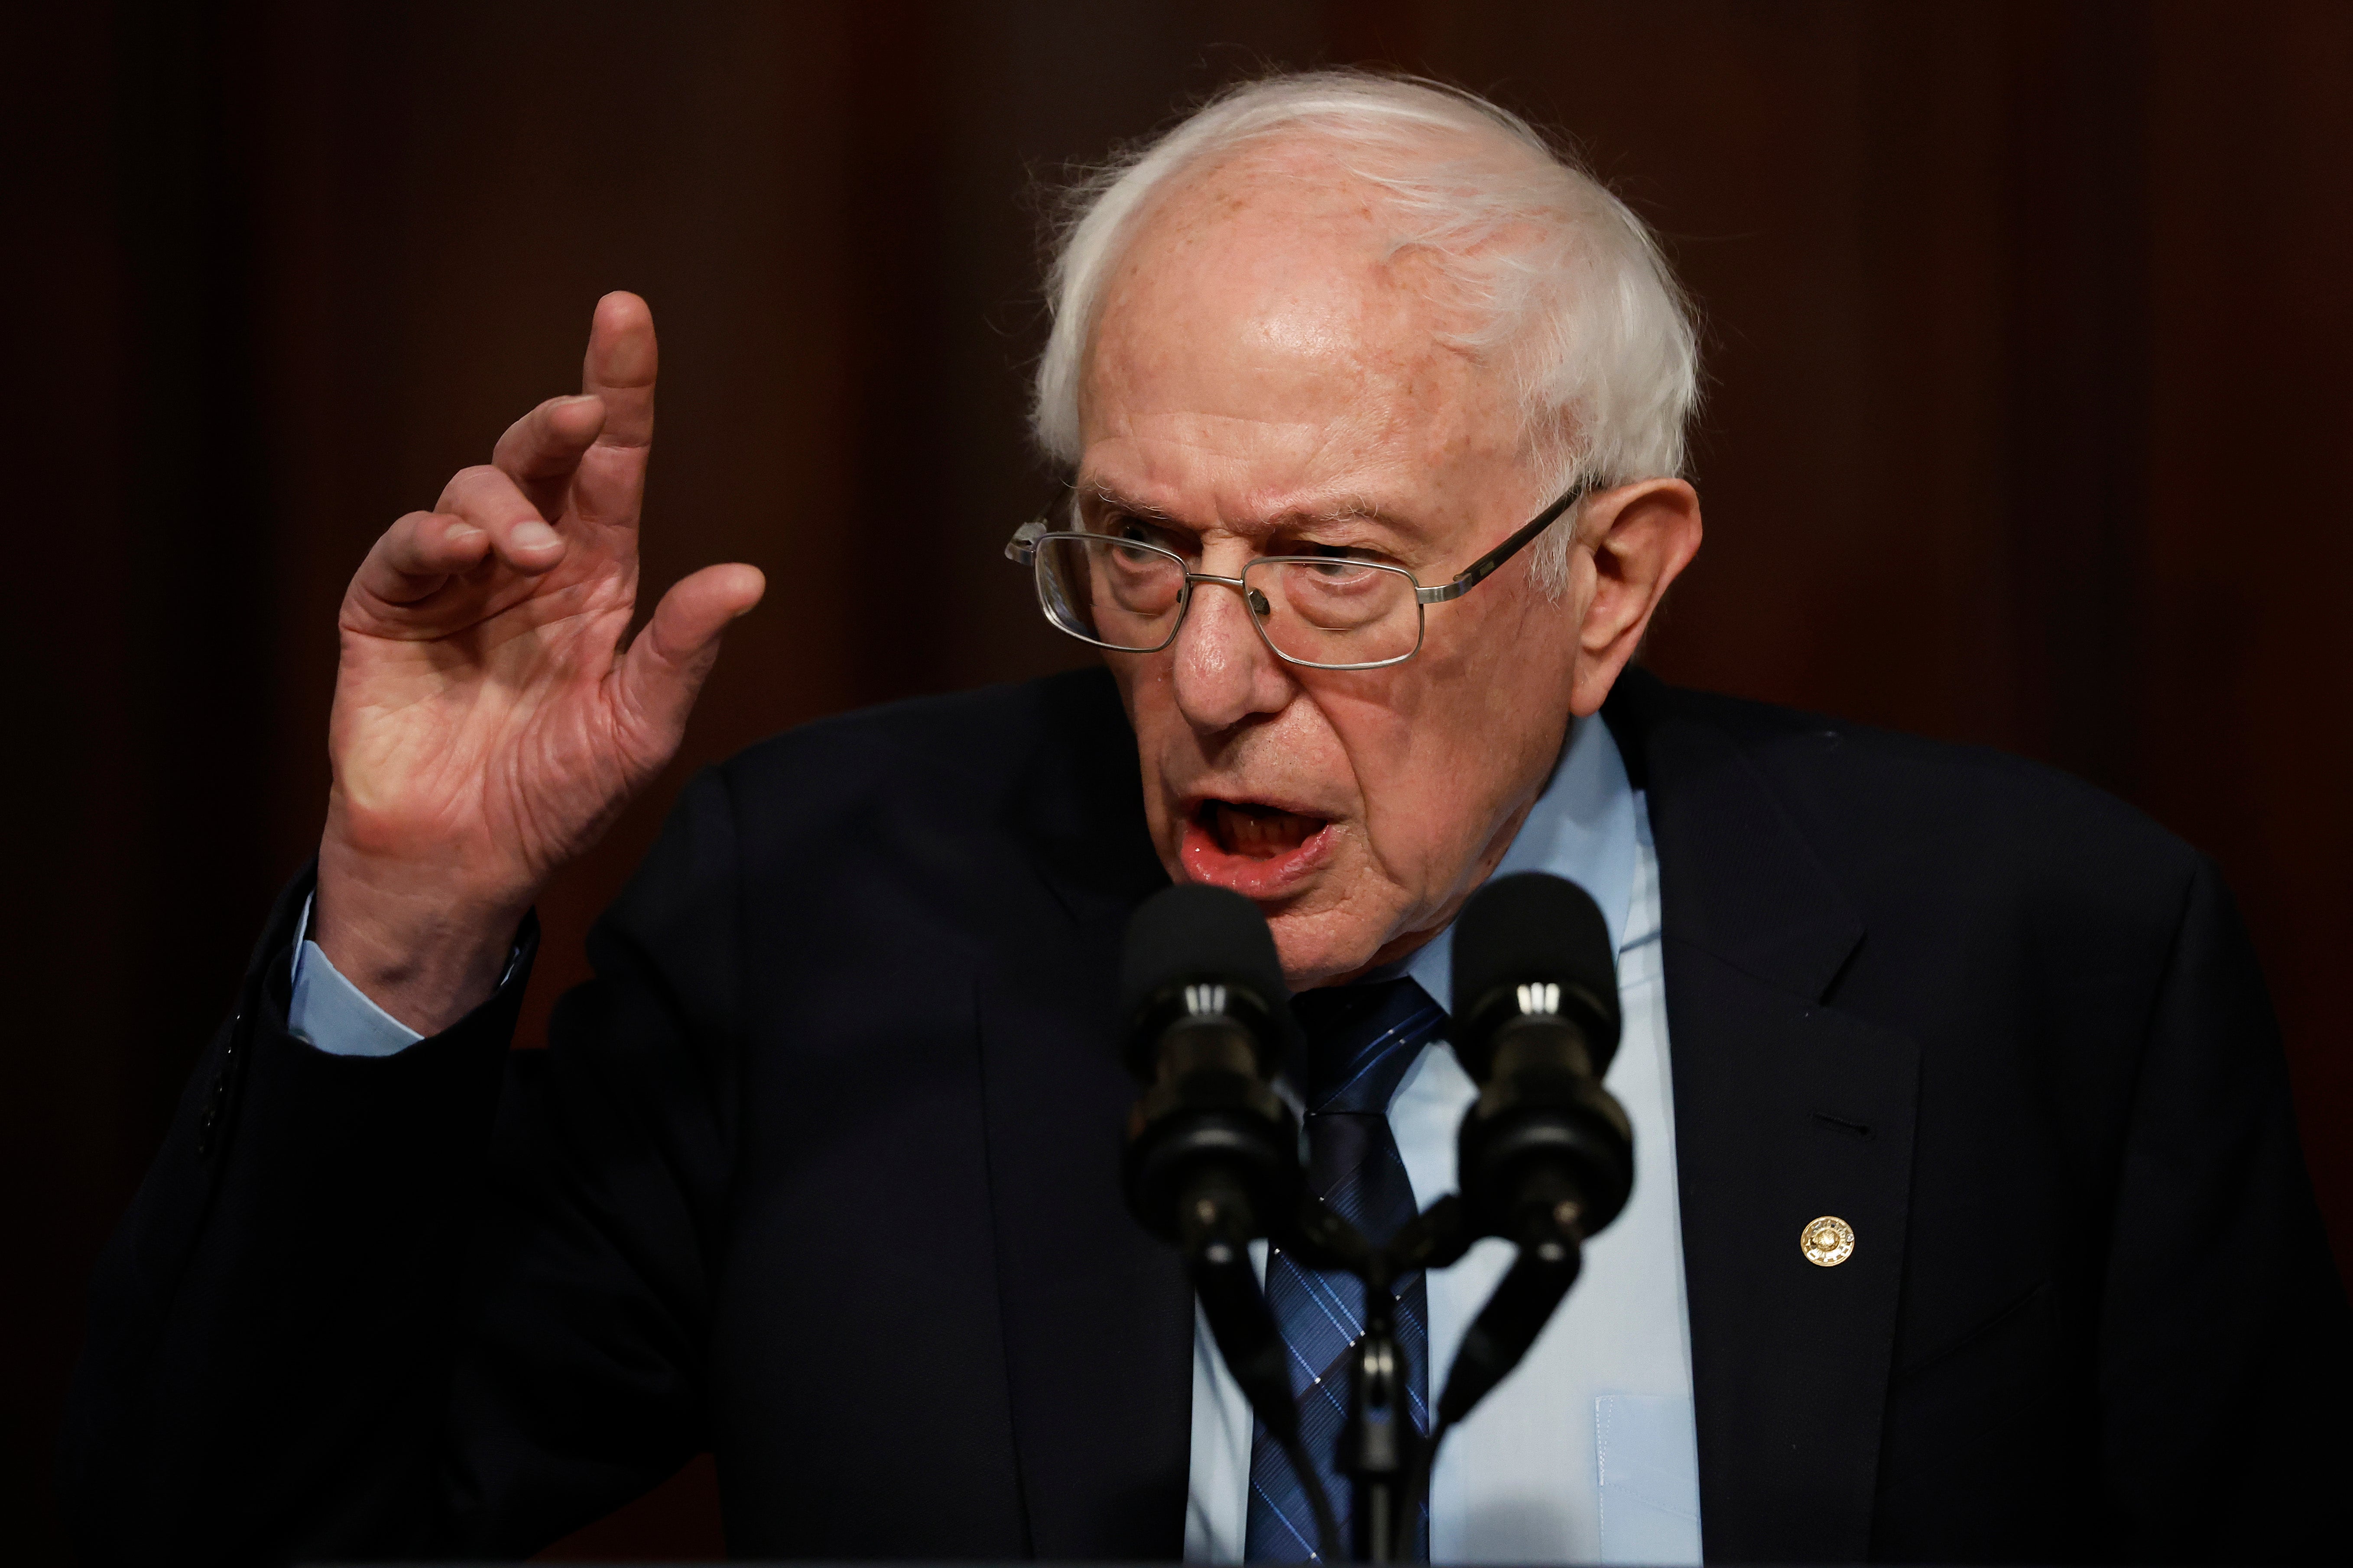 Bernie Sanders issued a scathing statement towards Netanyahu on Thursday over campus protests